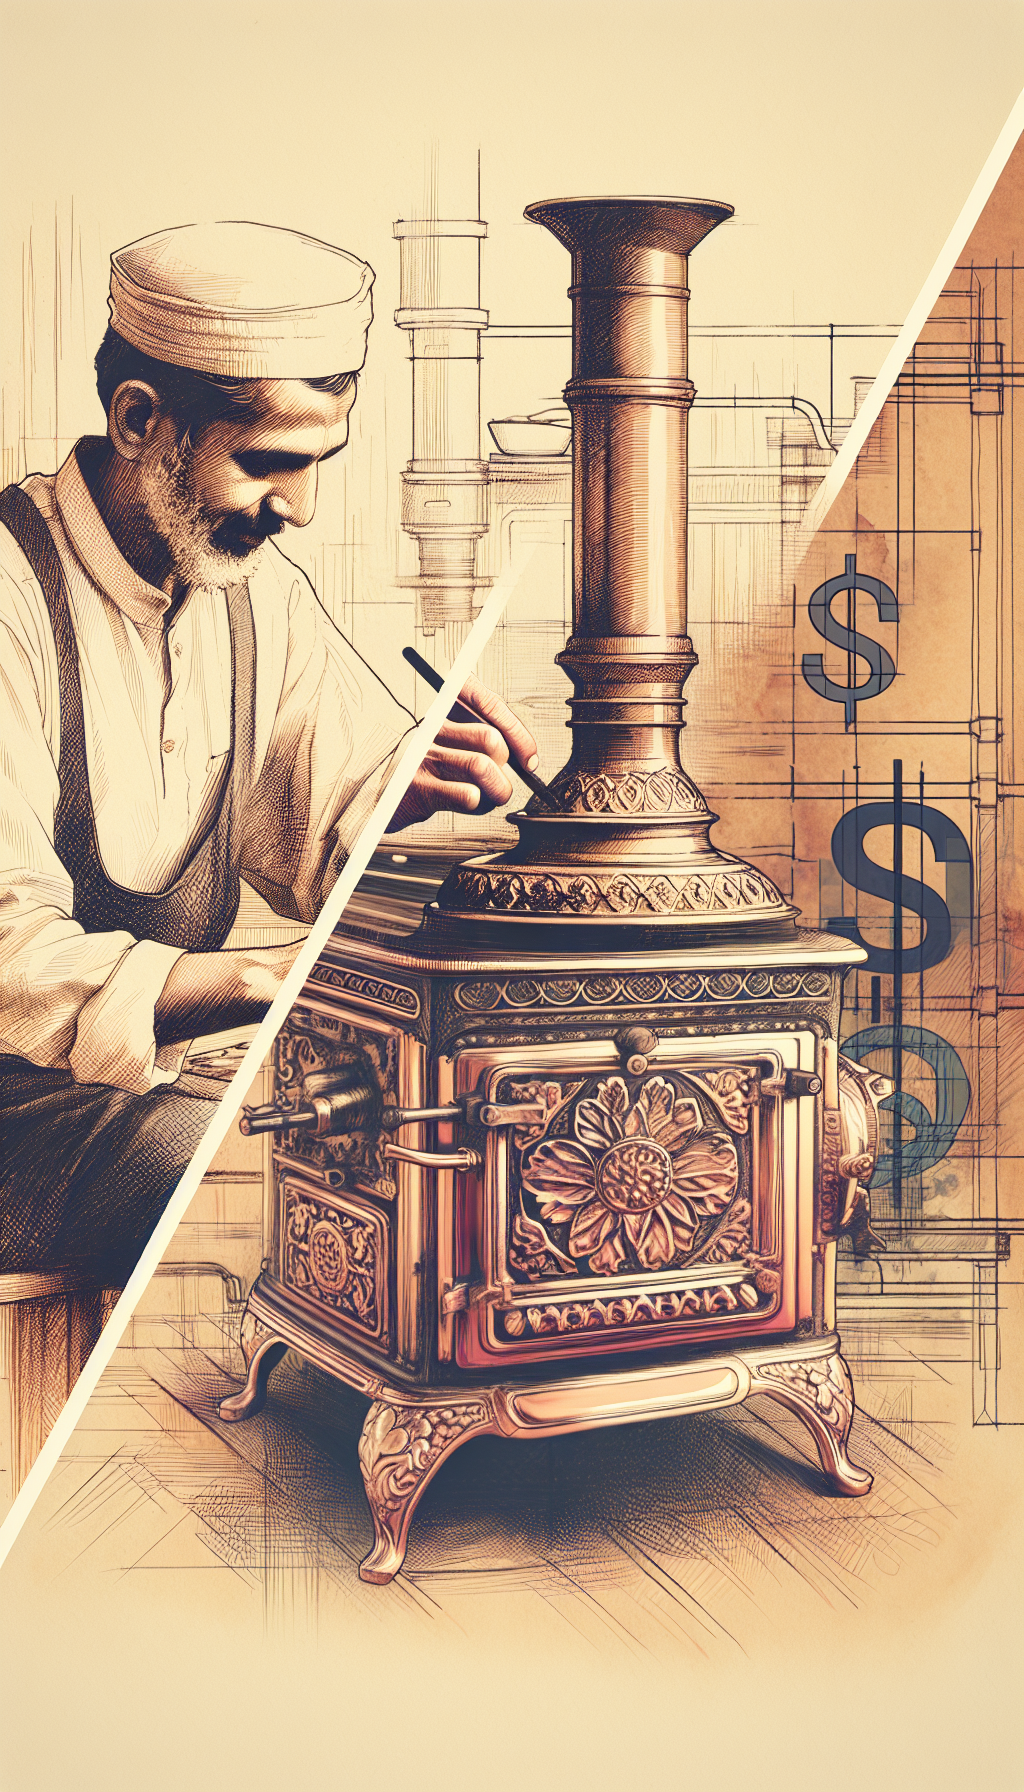 A delicate, sepia-toned sketch portrays a craftsman's hands gently polishing an intricately designed antique parlor stove, which transitions into vivid watercolor hues that highlight restored features. Beside it, semi-transparent blueprints overlay to suggest thoughtful planning, while dollar signs subtly engraved in the stove's cast iron denote increased value, preserving the essence of its historic authenticity.